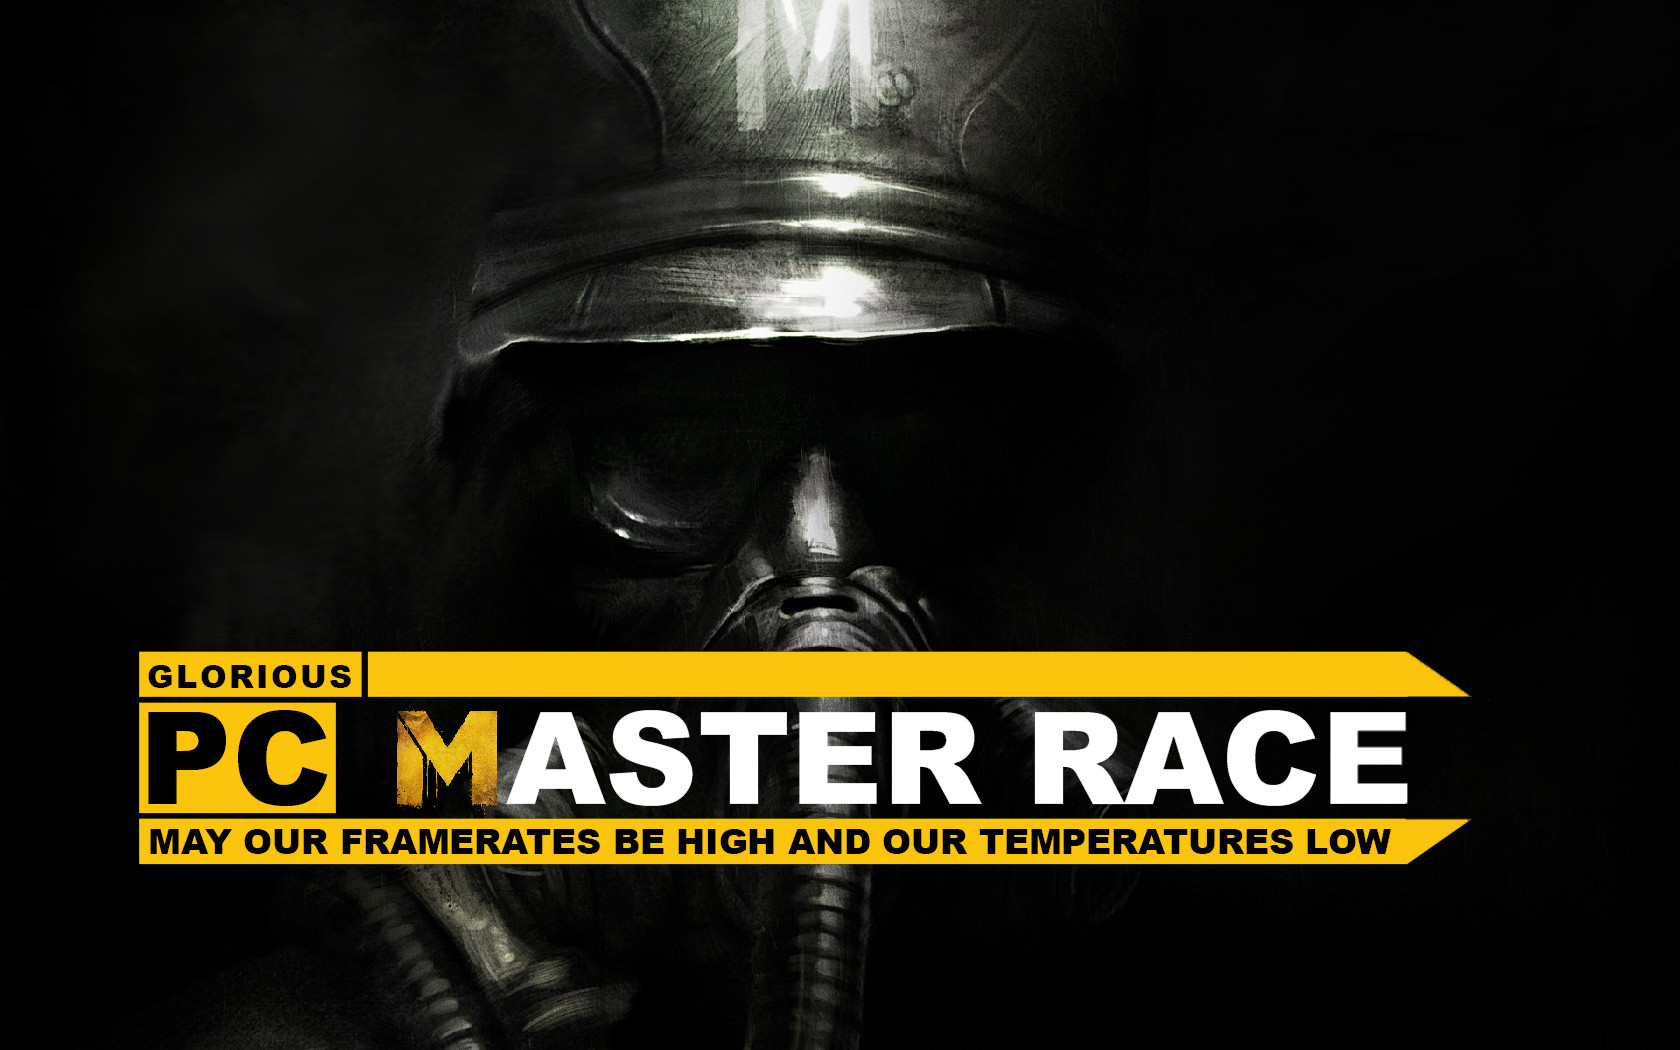 PC Master Race. Console Wars PC Master Race. Glorious PC. PC Master Race Wallpaper.